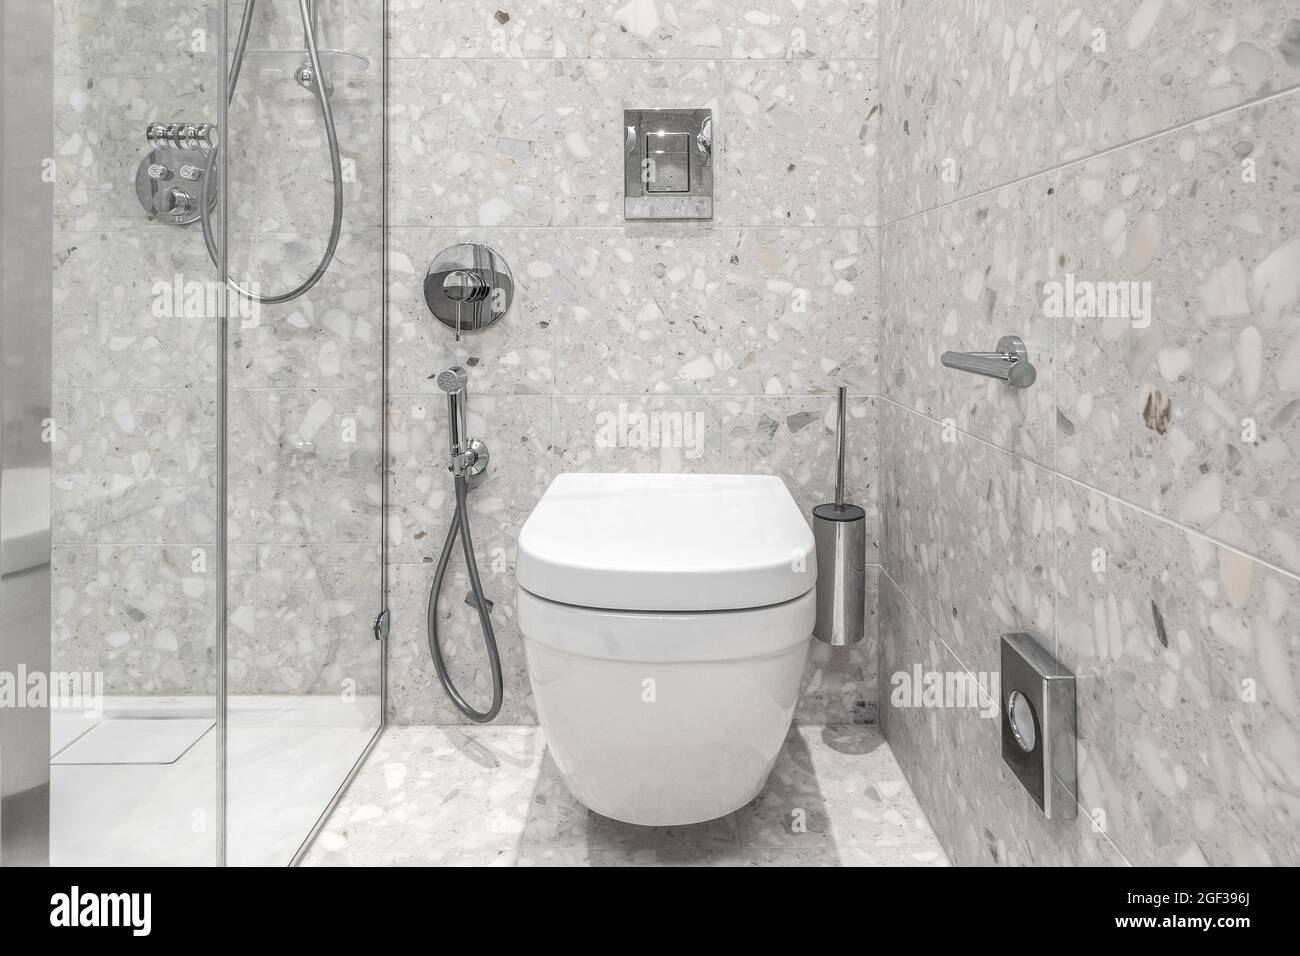 Furnished modern minimalist bathroom interior with bathroom chrome accessories and grey tiles Stock Photo